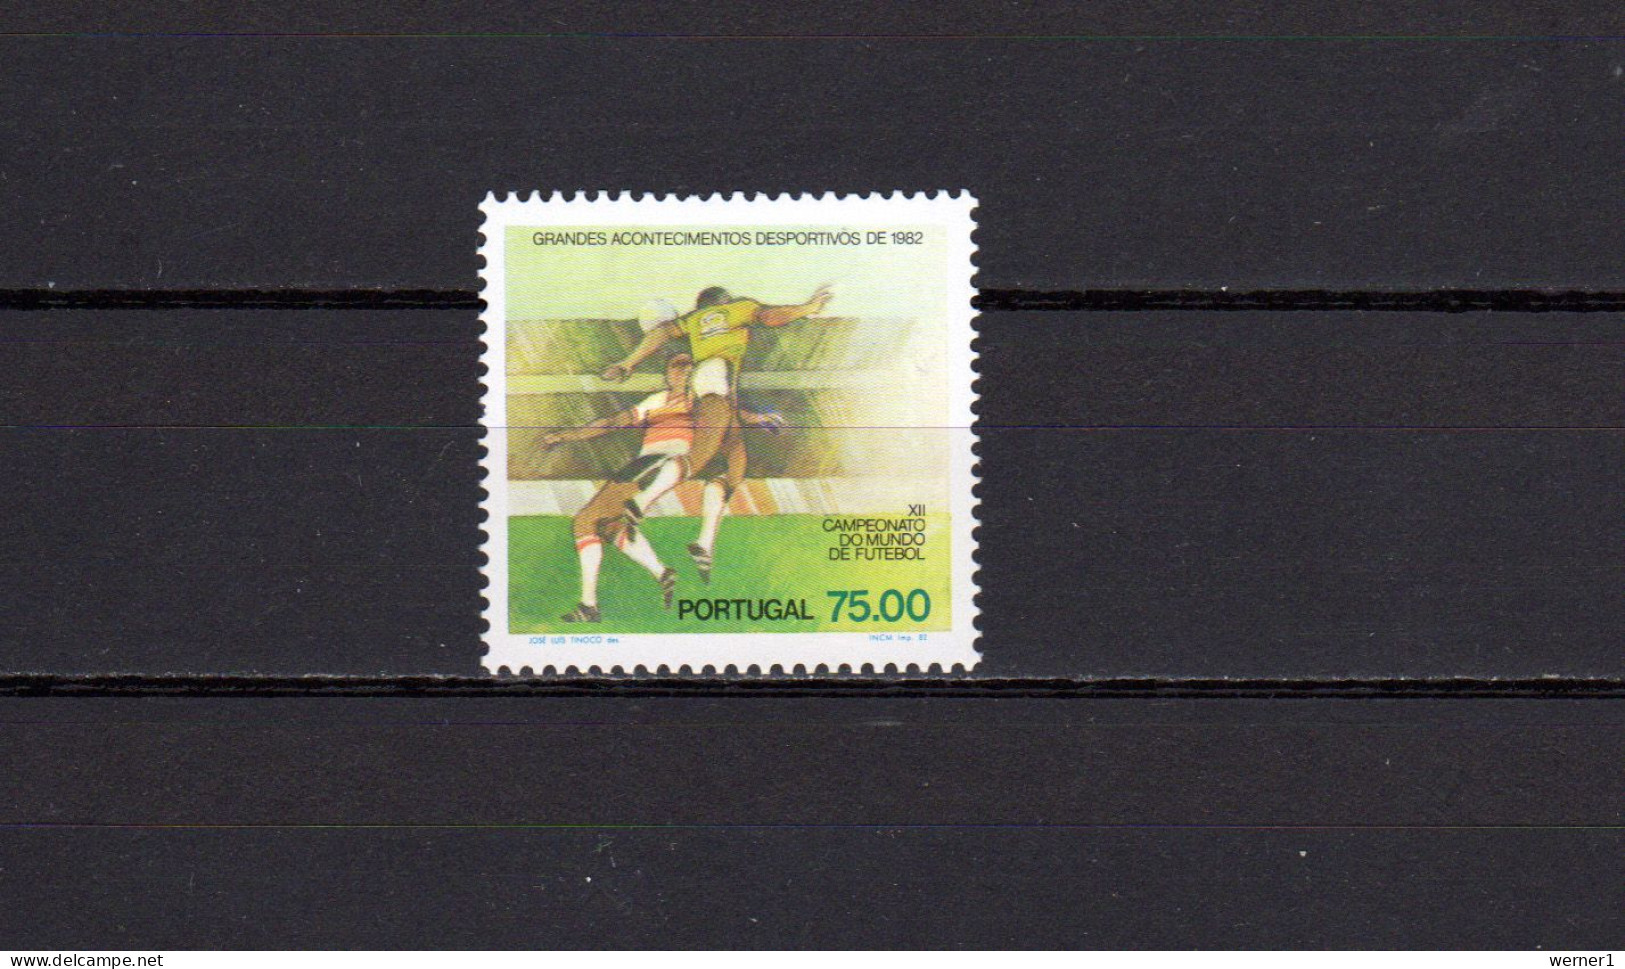 Portugal 1982 Football Soccer World Cup Stamp MNH - 1982 – Espagne